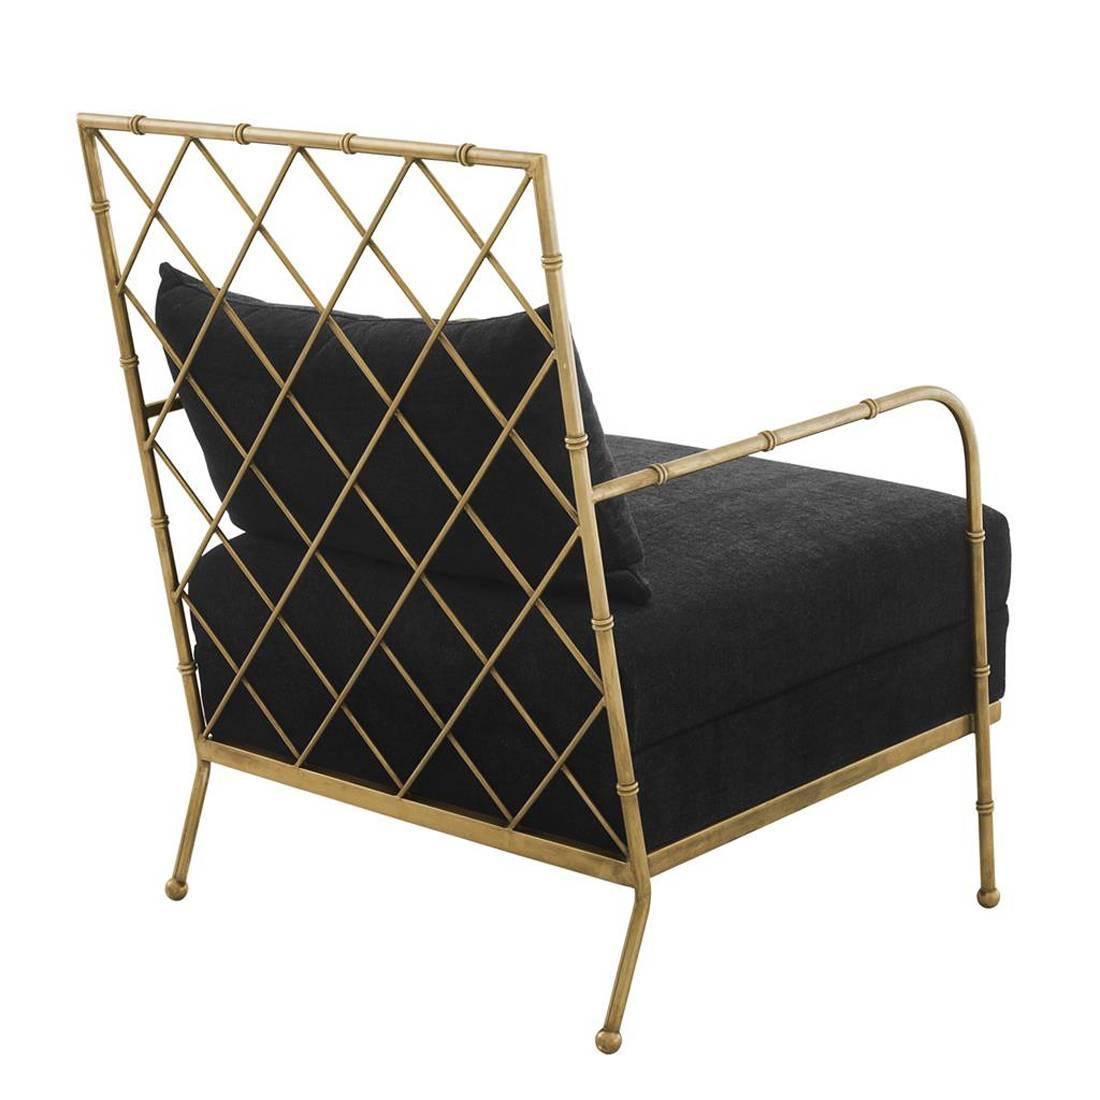 Hand-Crafted Tropic Armchair with black velvet fabric in Brass or Nickel Finish